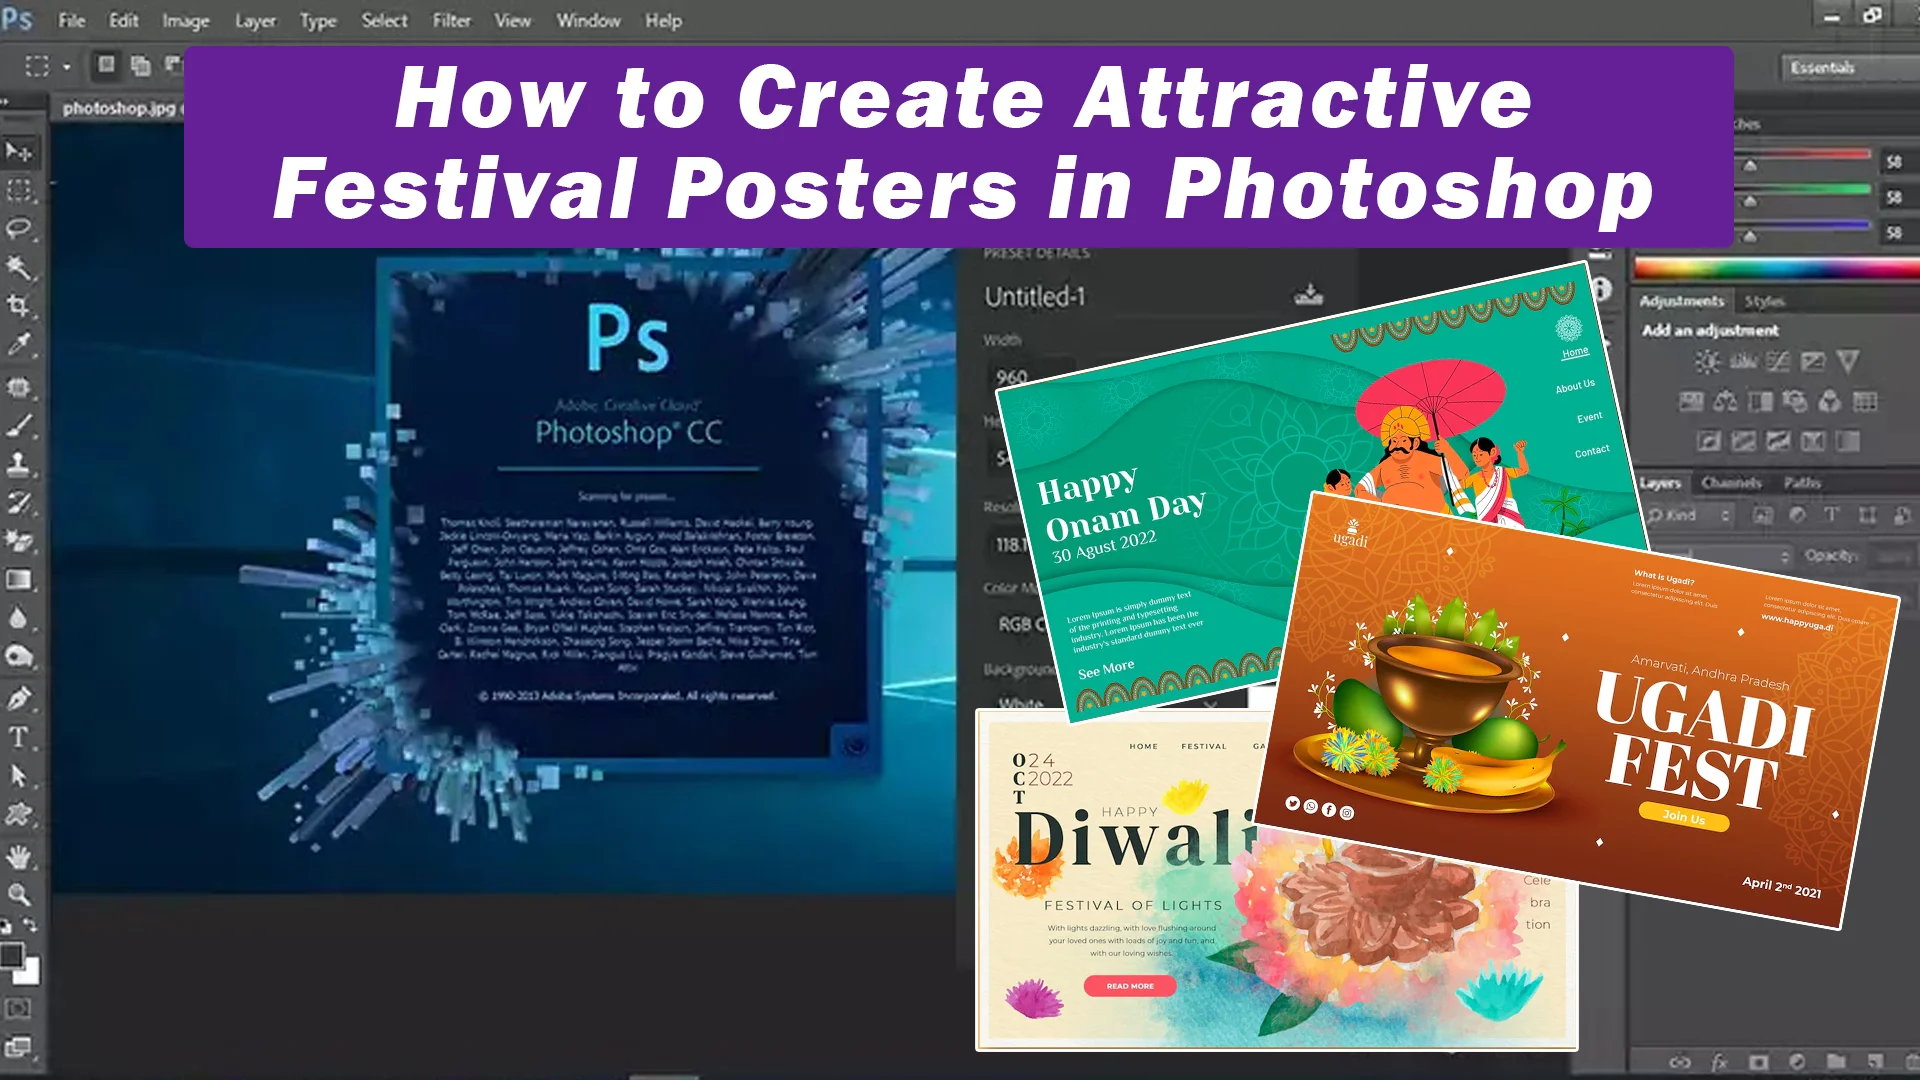 How to Create Attractive Festival Posters in Photoshop